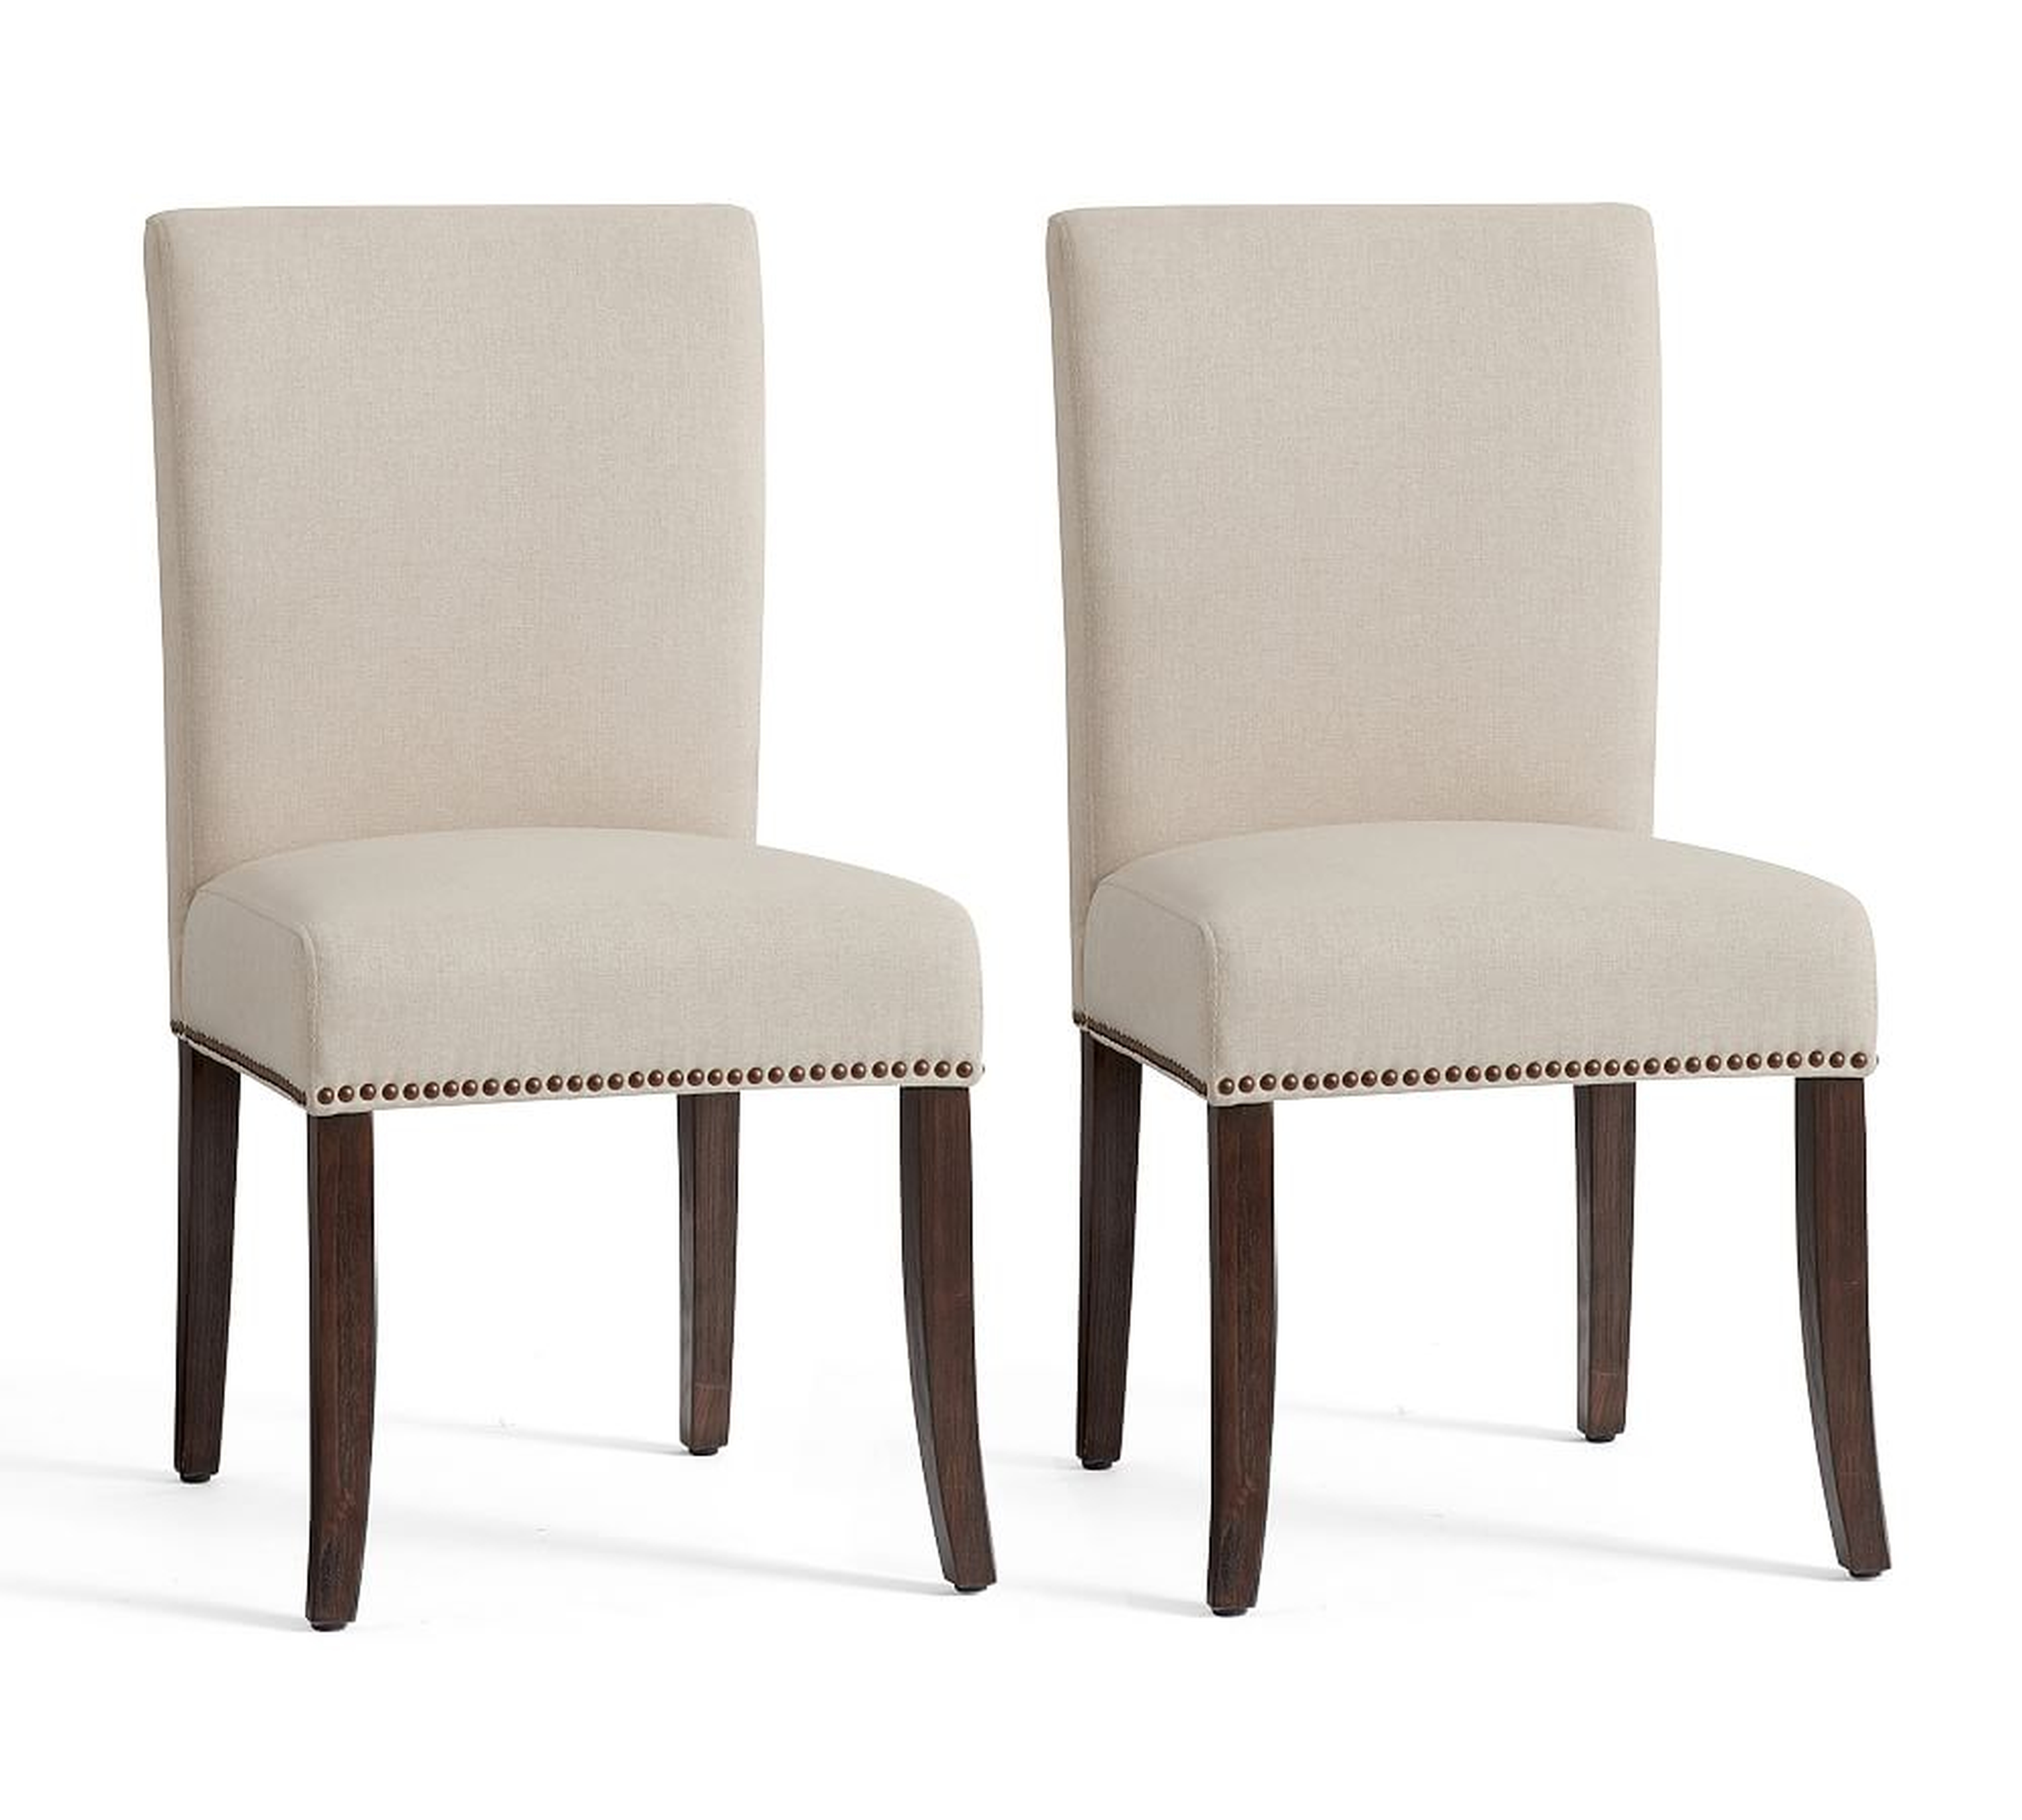 Porter Upholstered Dining Side Chair, Brown Wash, Set of 2 - Pottery Barn